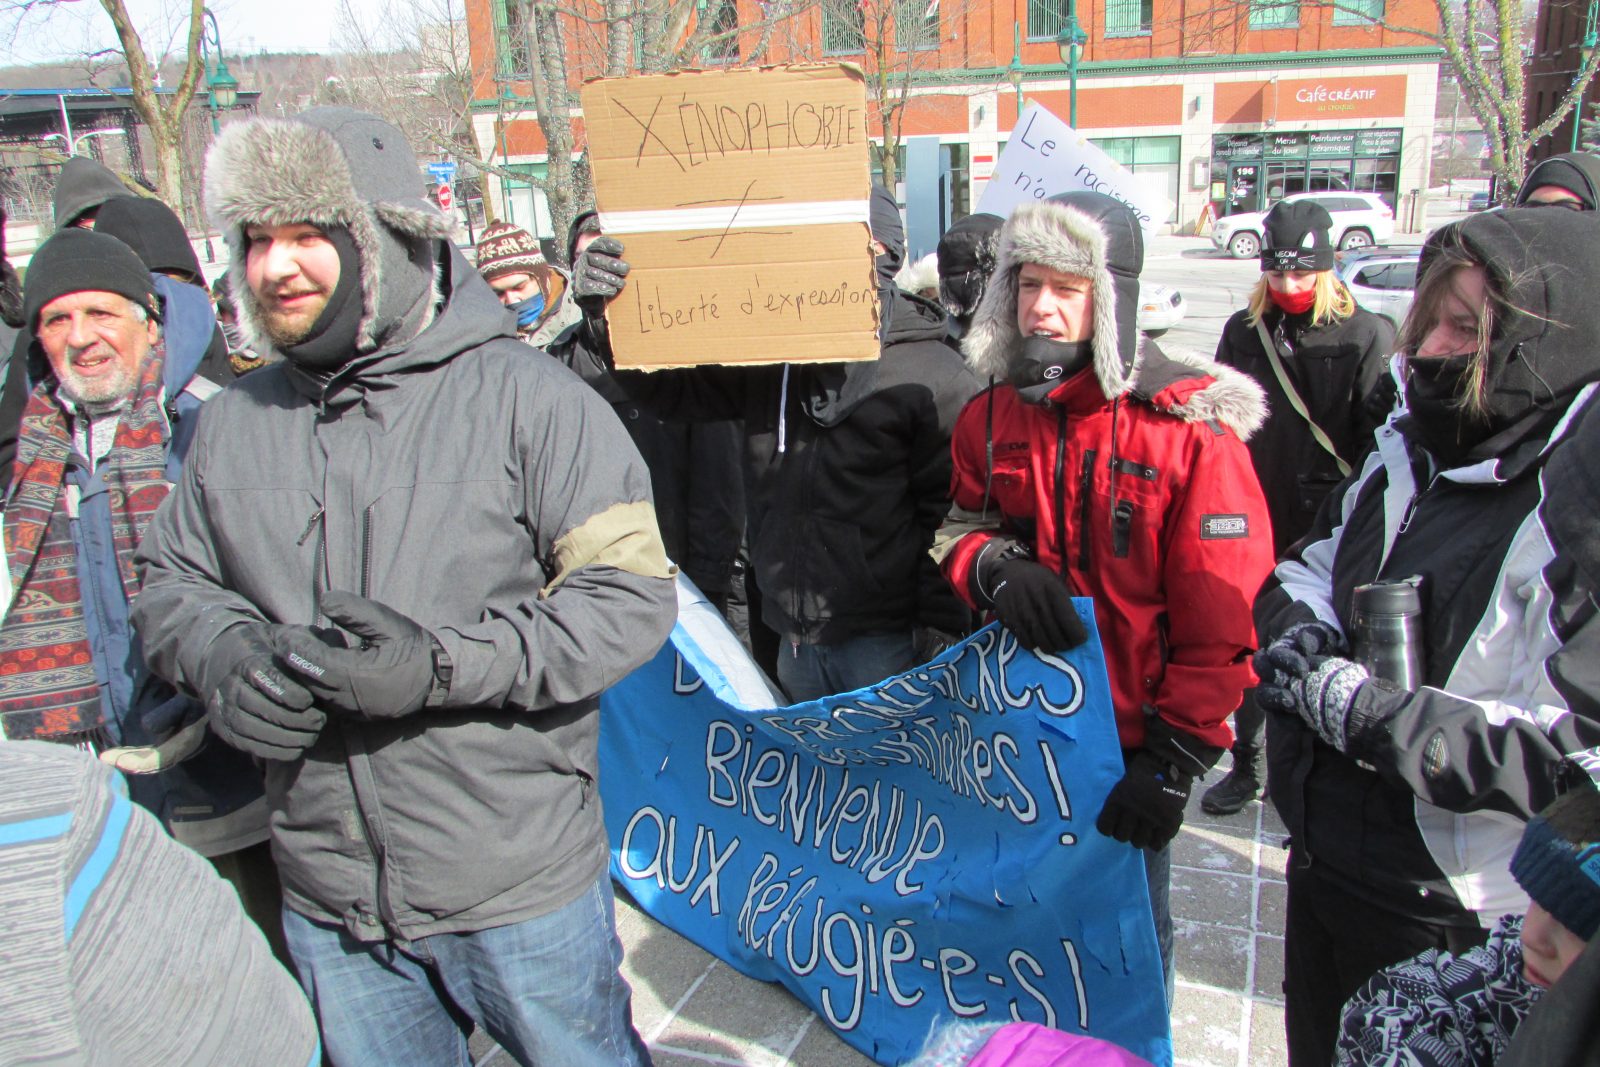 This is how protesters face  off in Sherbrooke